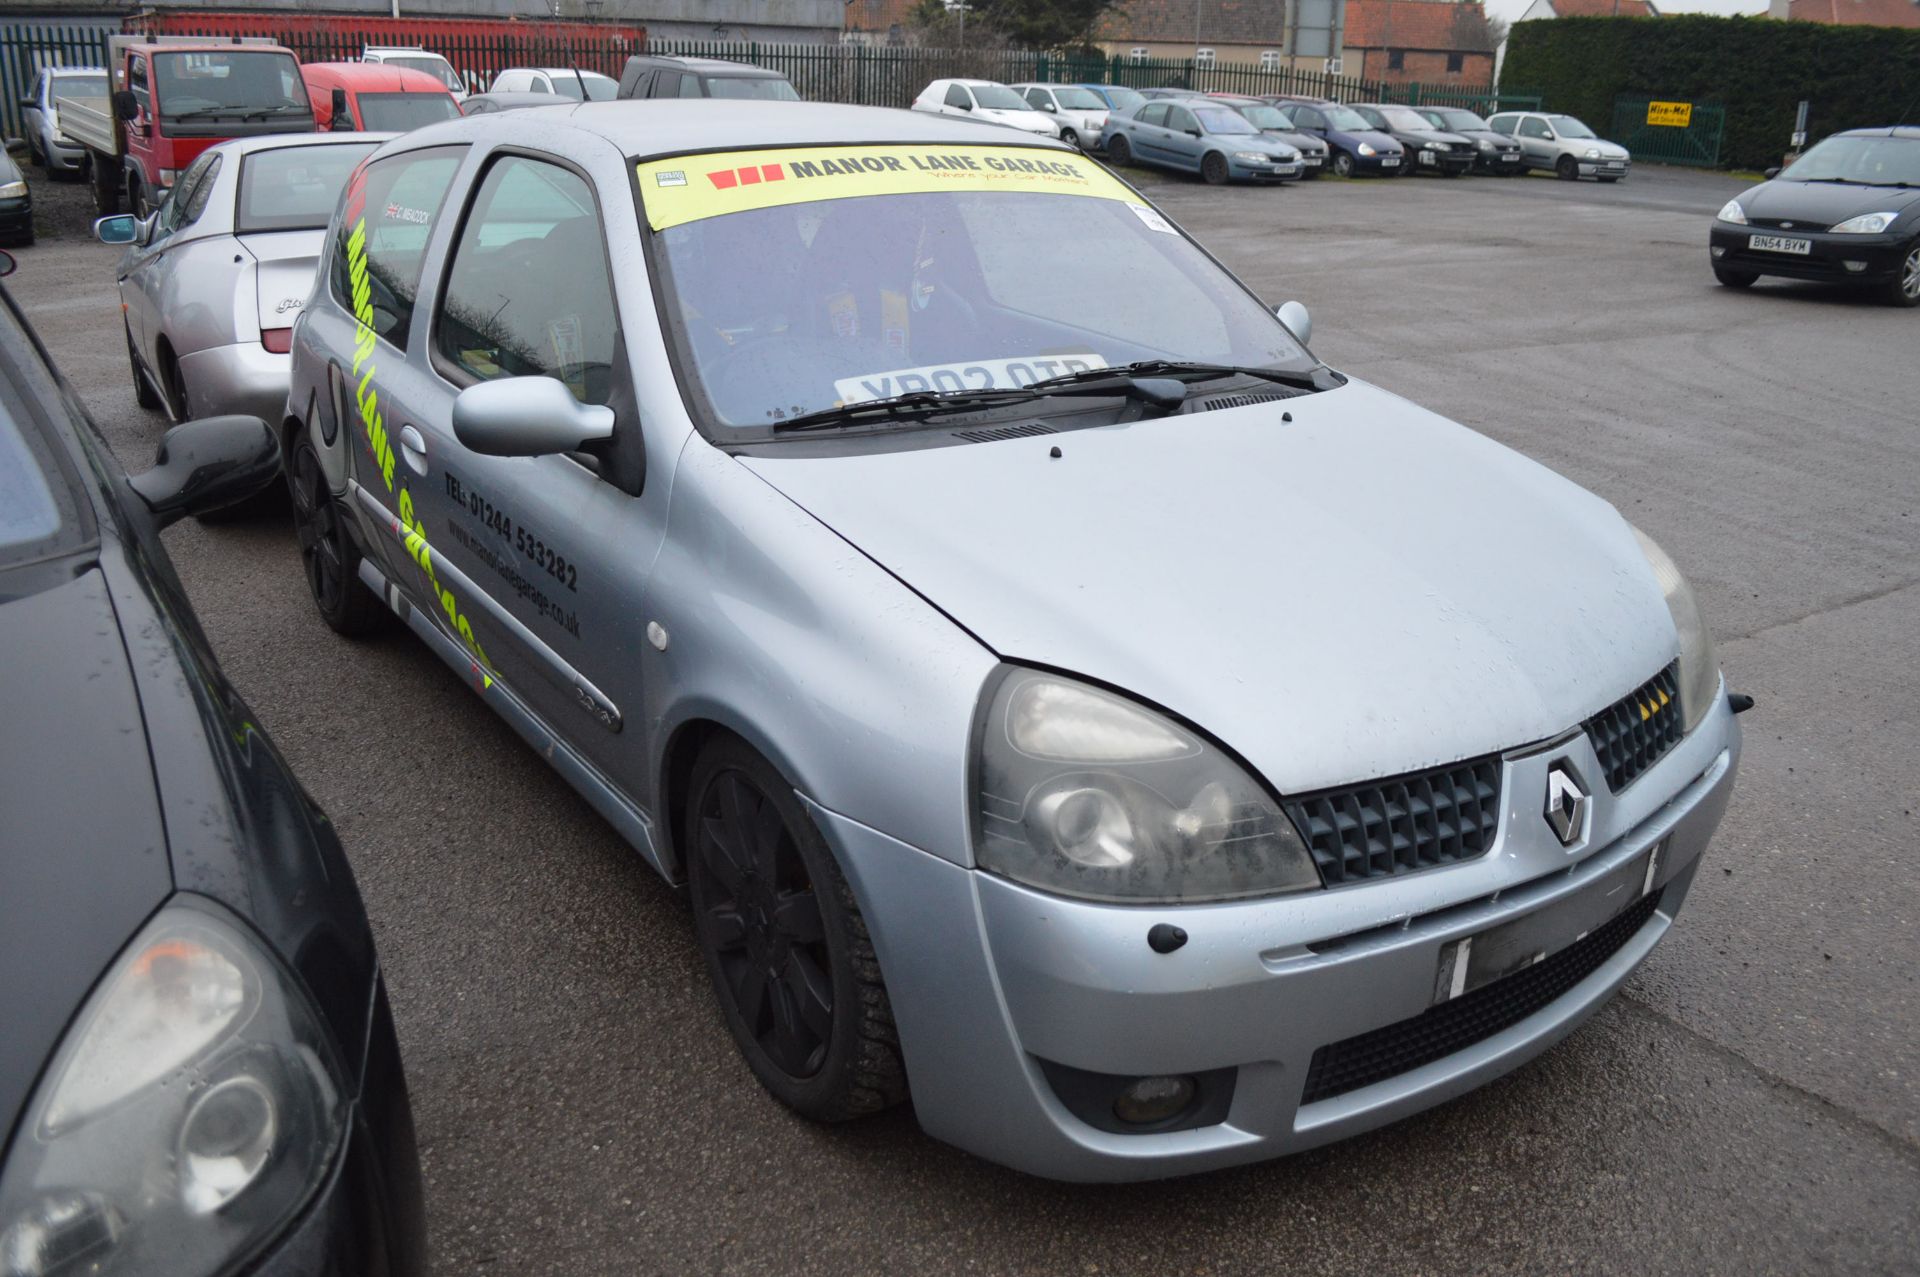 2002/02 REG RENAULT CLIO 2.0 SPORT TRACK/RACE CAR STRIPPED FOR TRACK DAYS